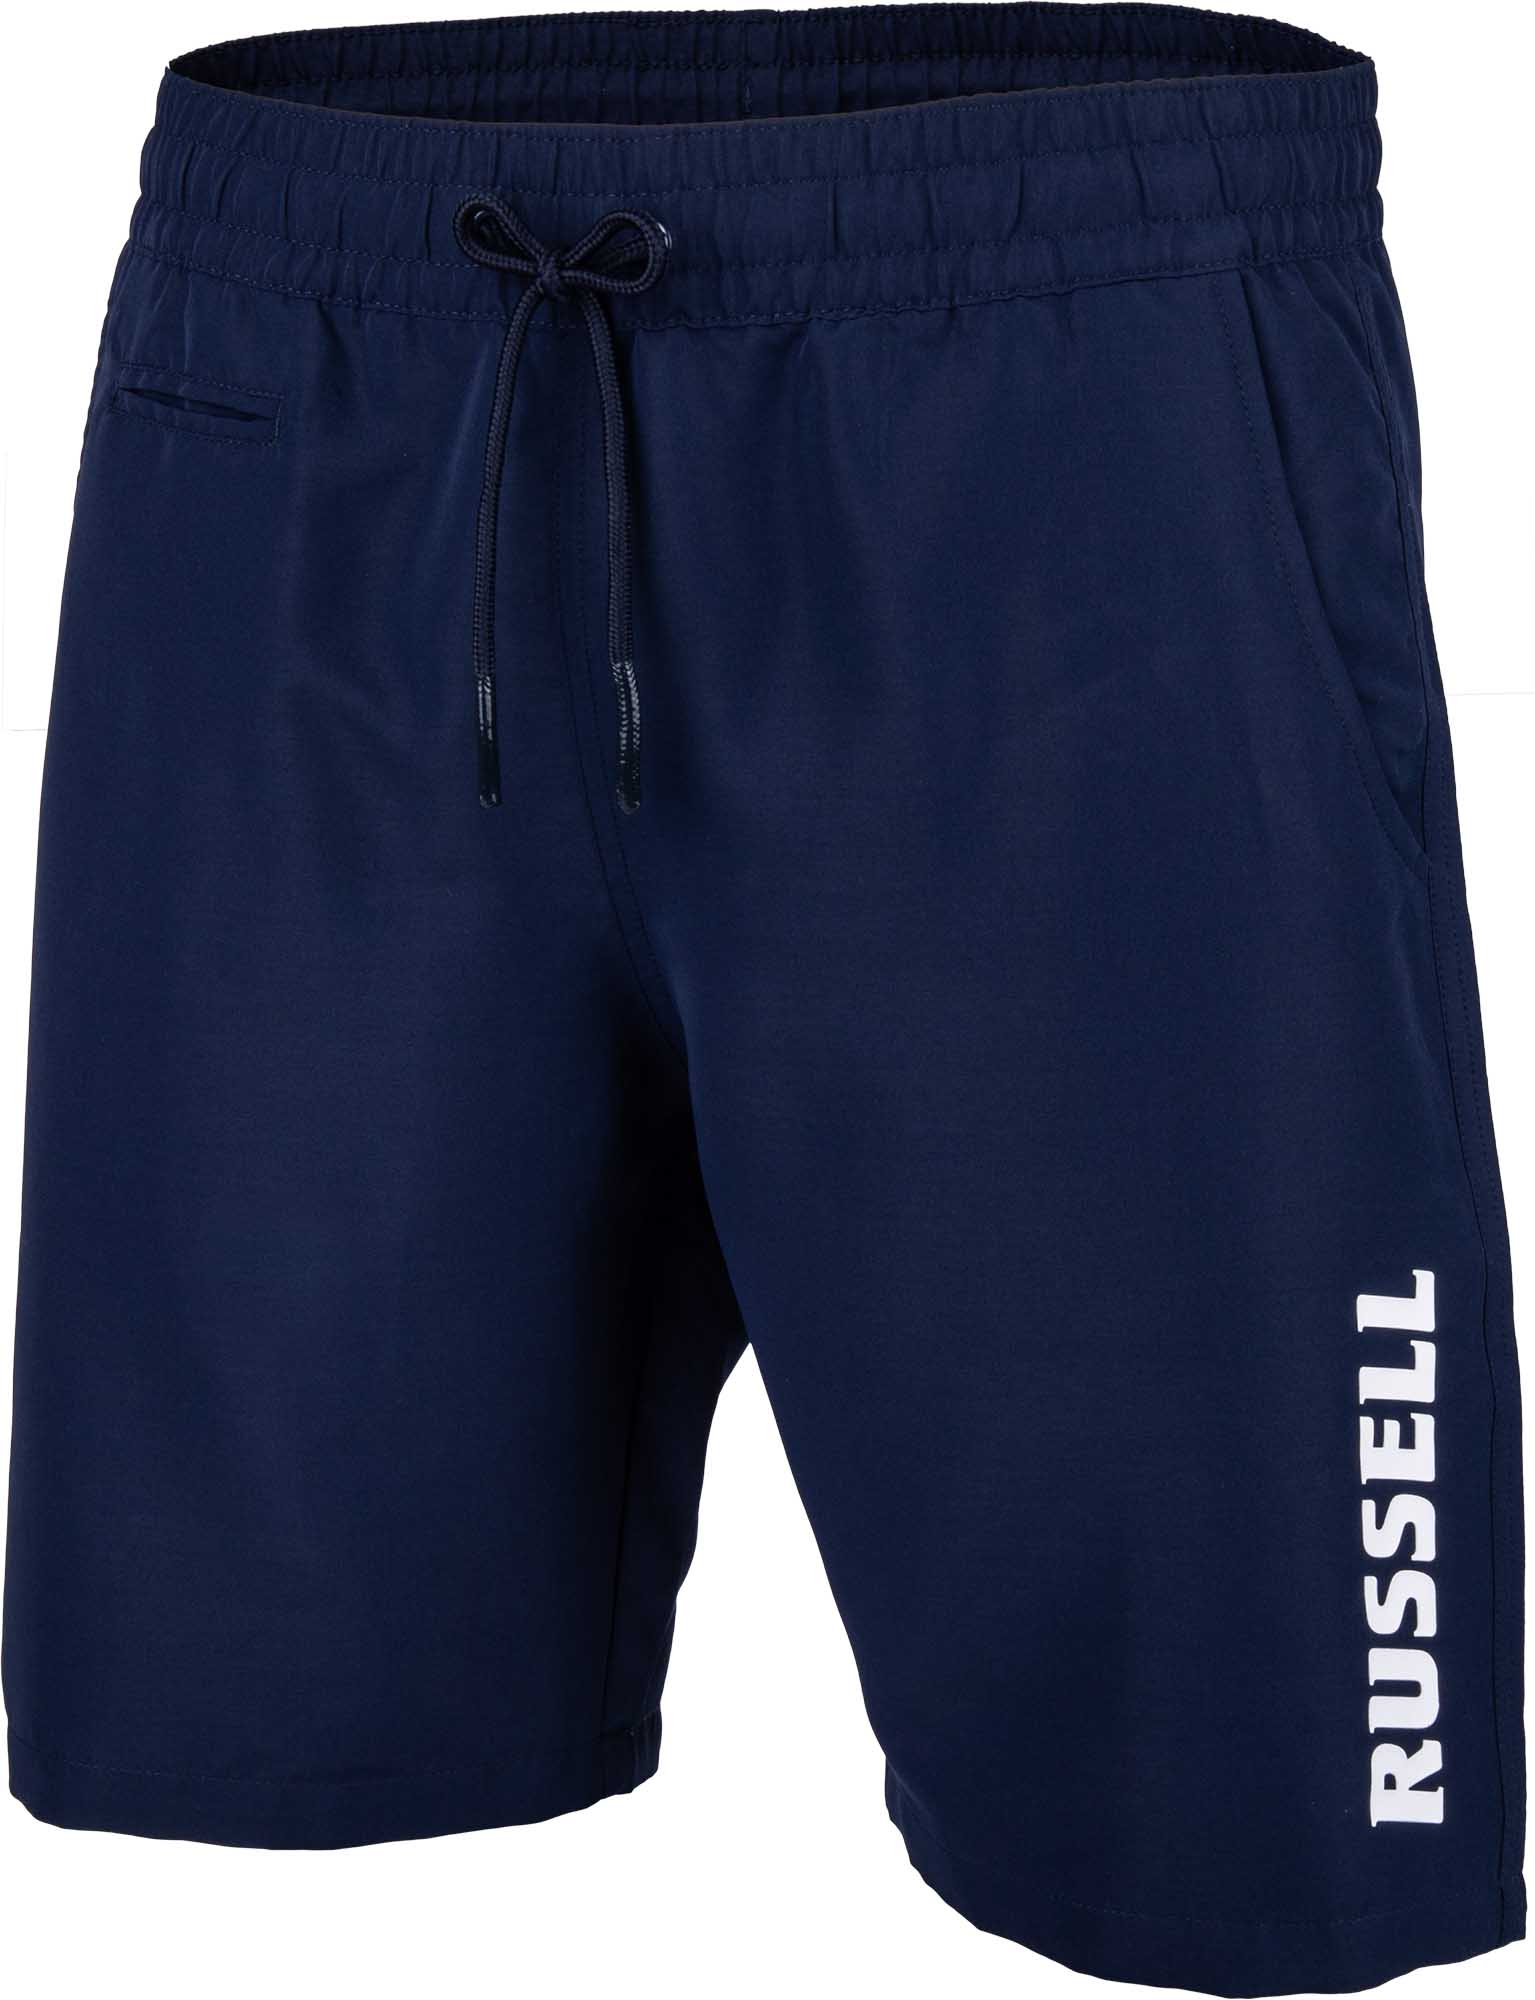 Russell Athletic RUSSELL 1902 SHORTS | sportisimo.com